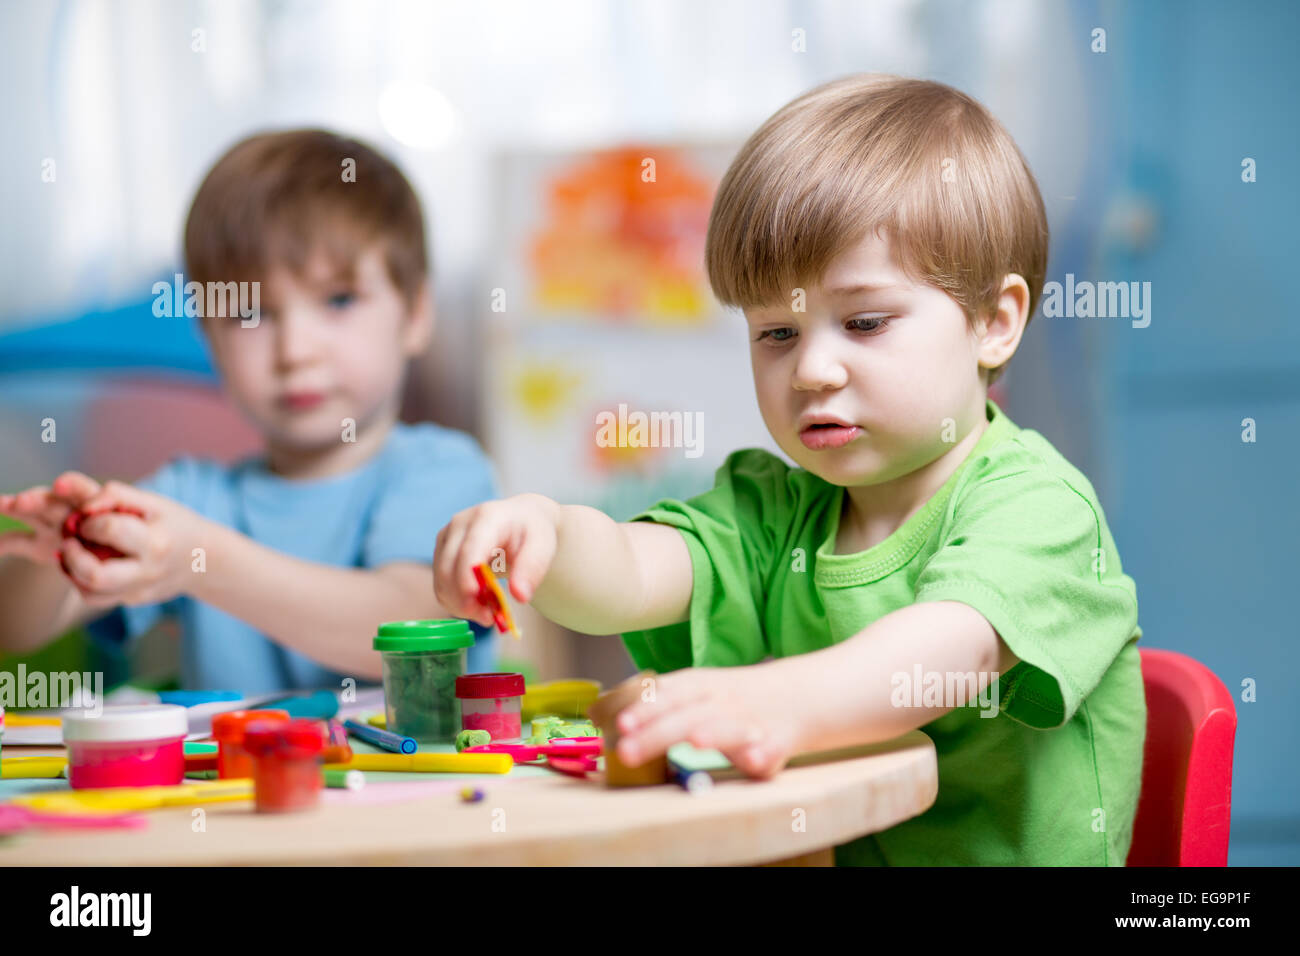 children making by hands Stock Photo